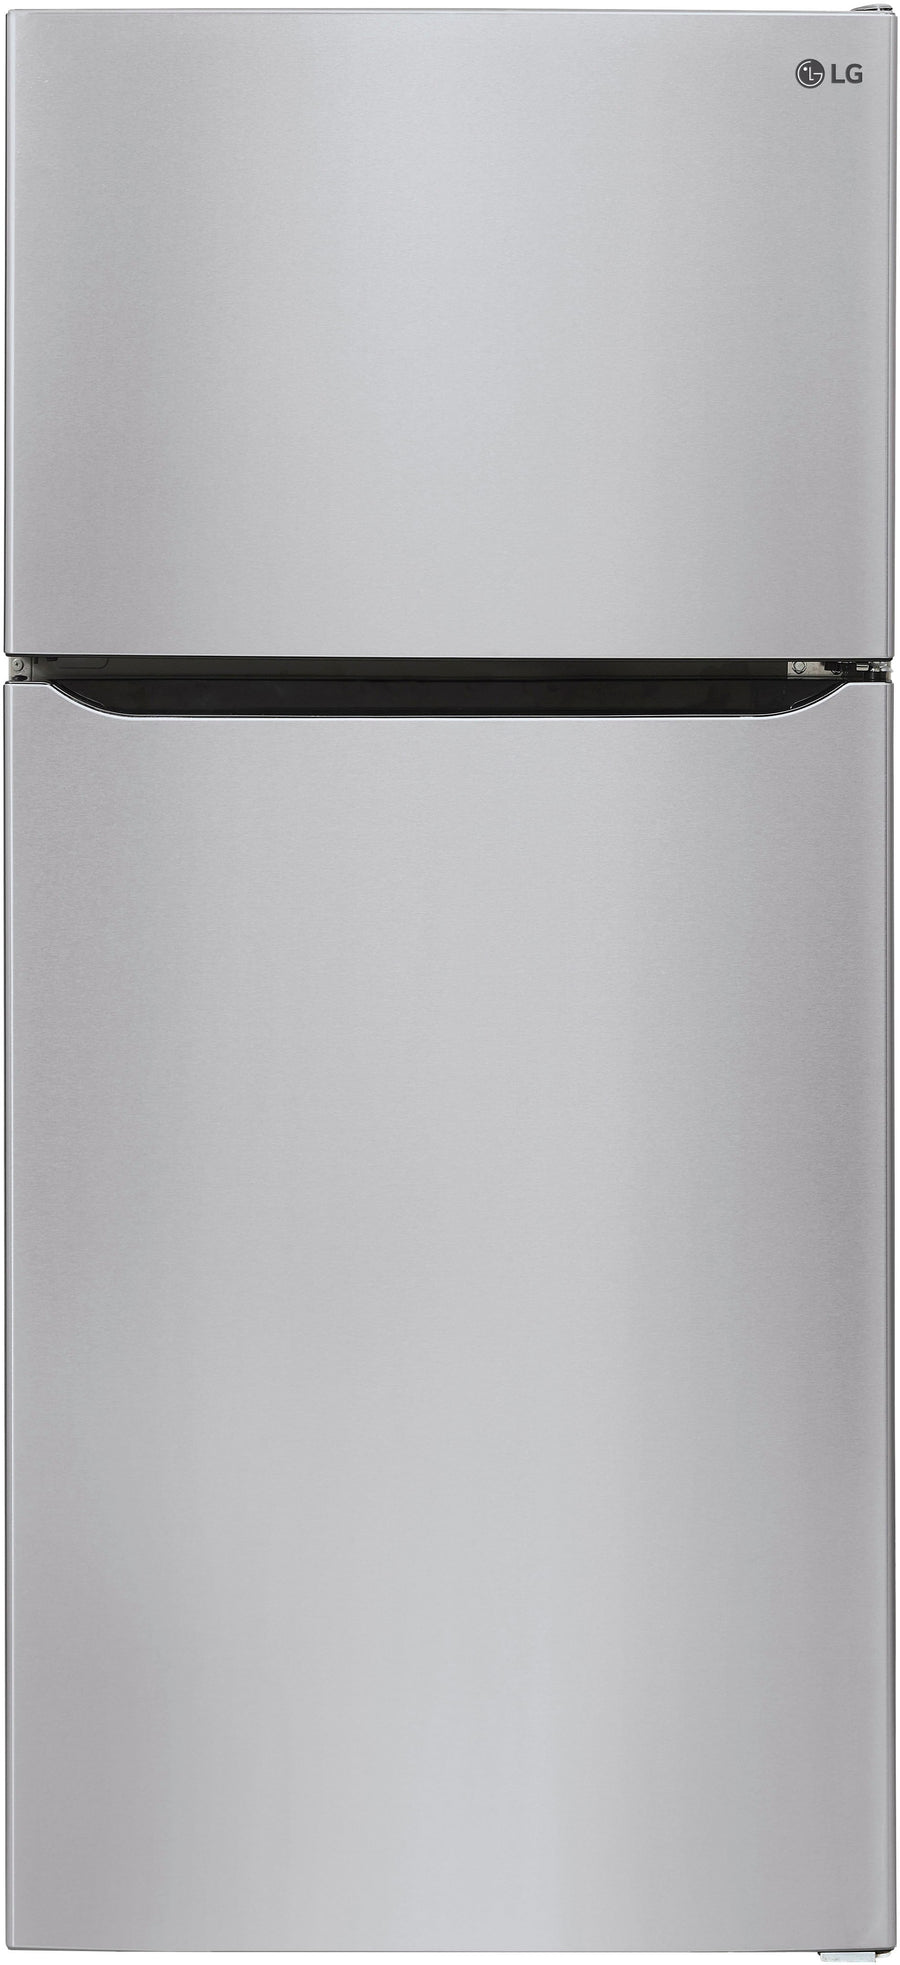 LG - 23.8 Cu Ft Top Mount Refrigerator with Internal Water Dispenser - Stainless steel_0